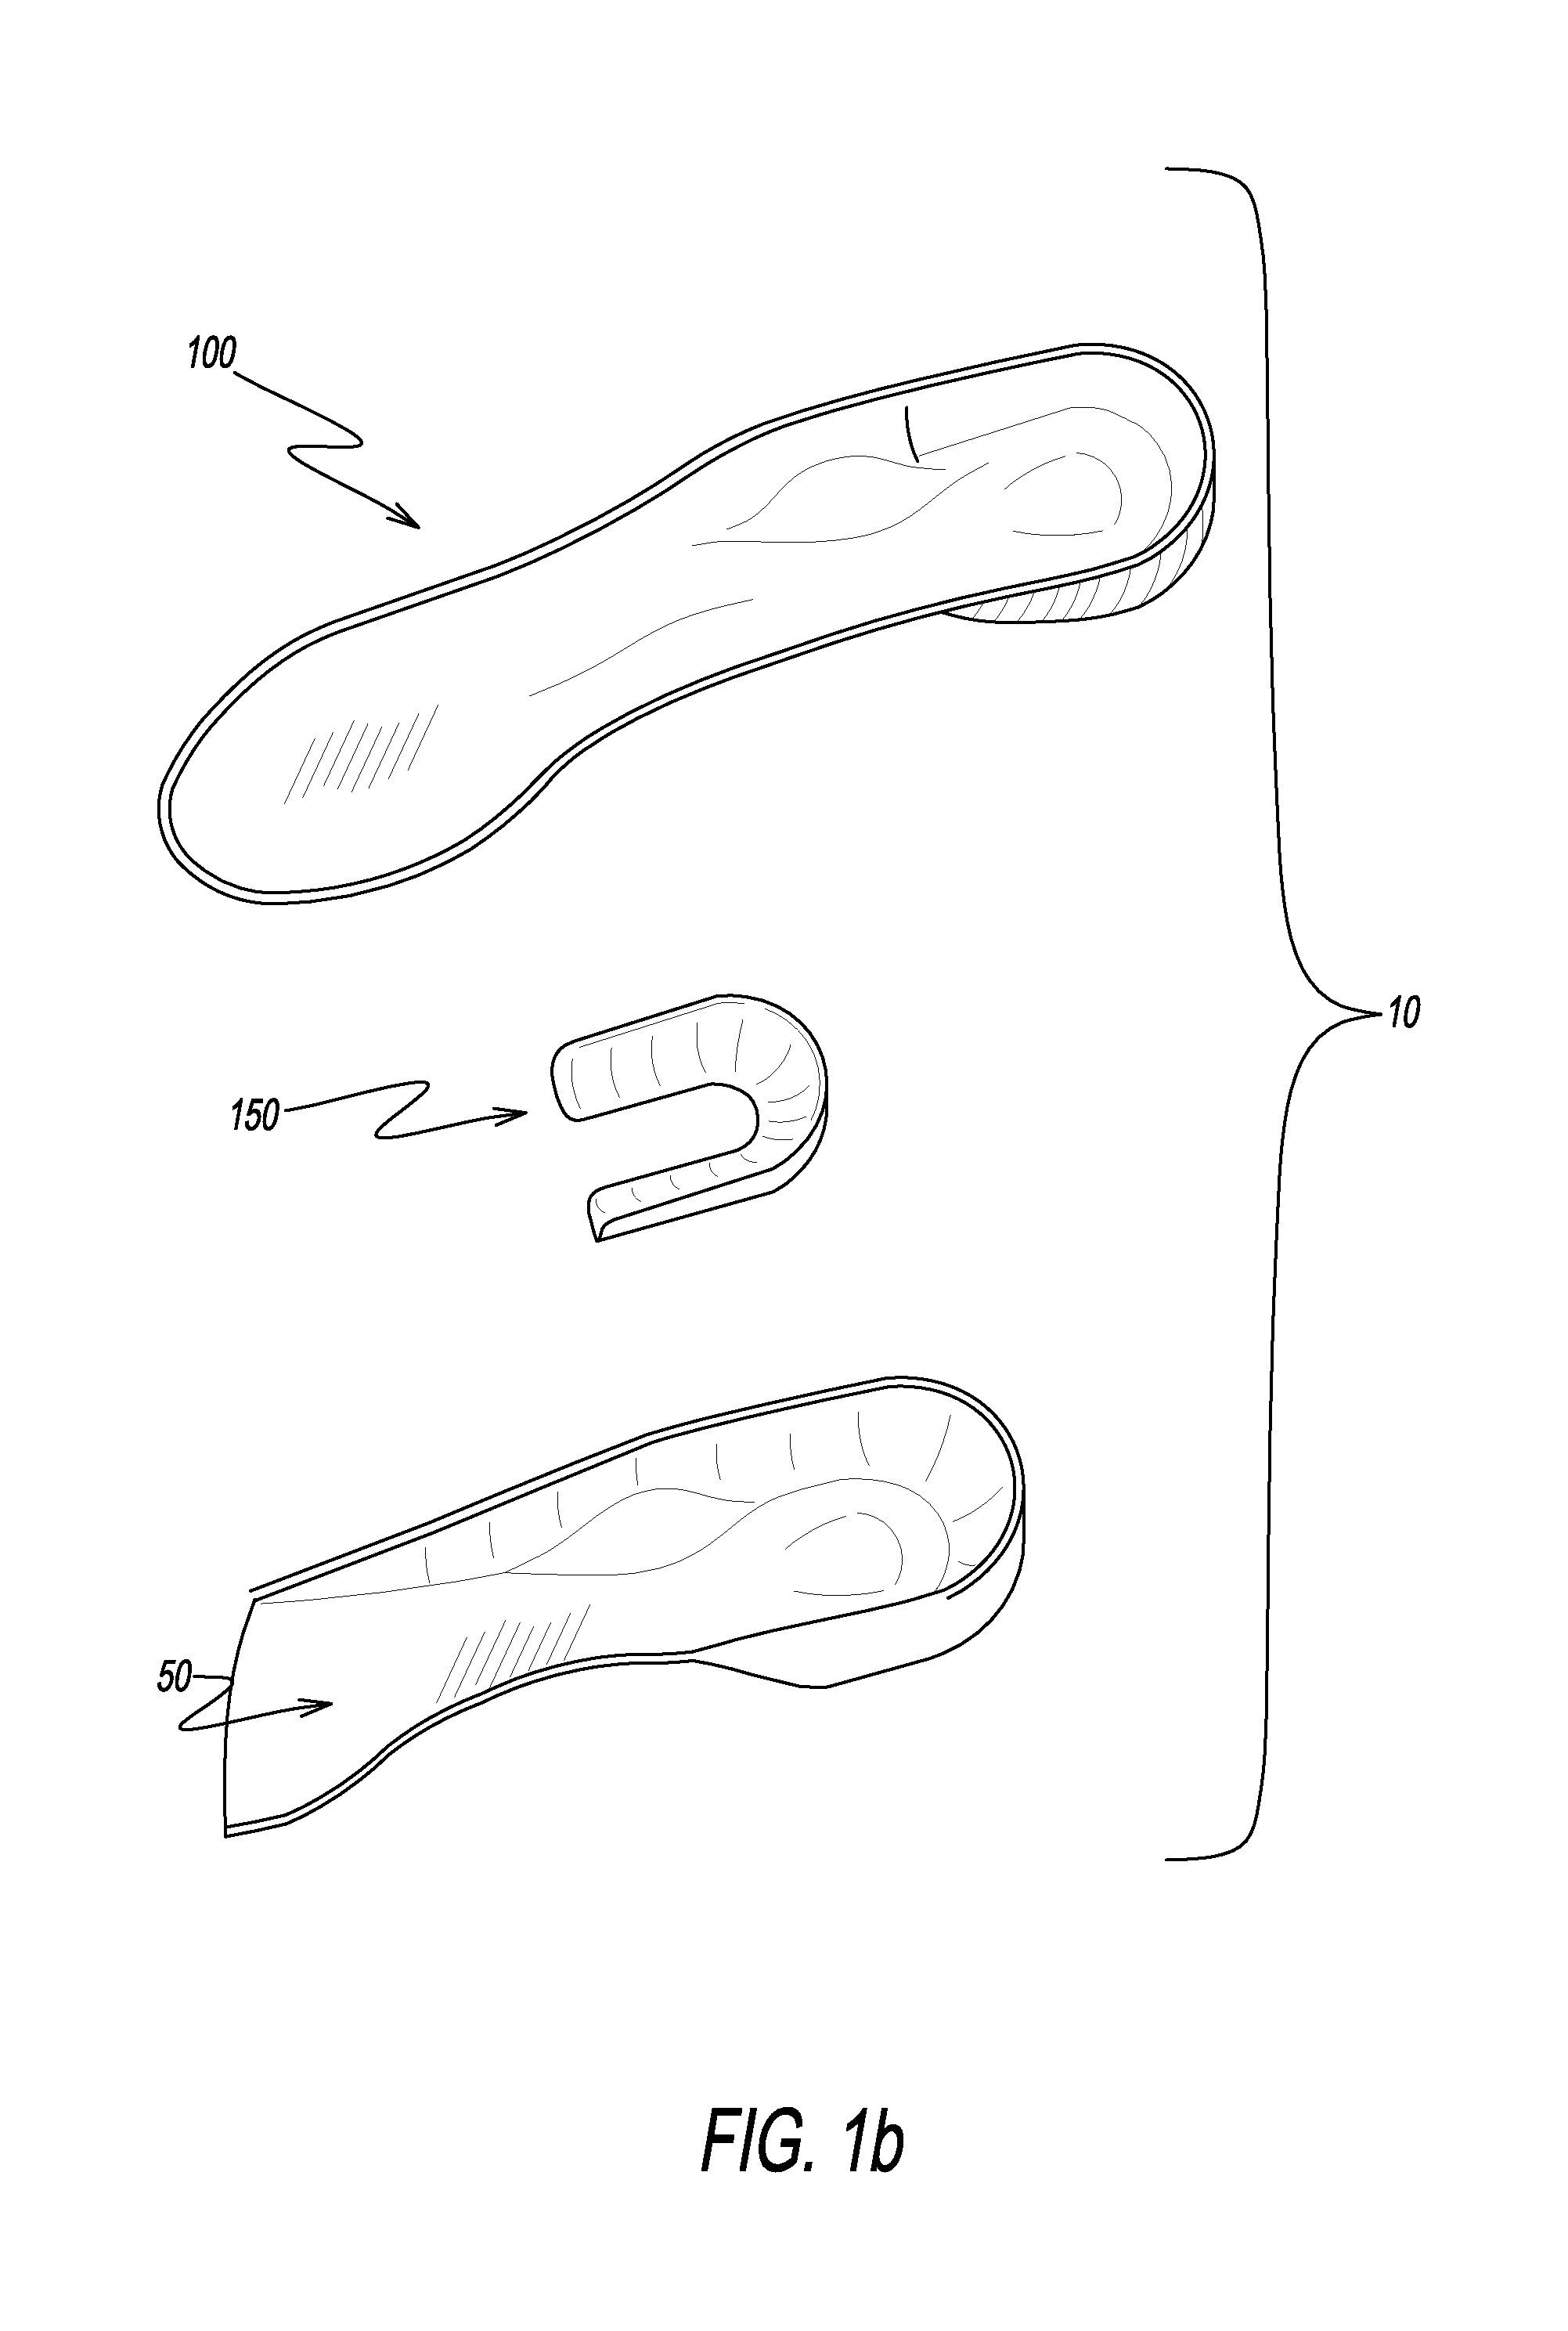 Dynamic support for an article of foot wear